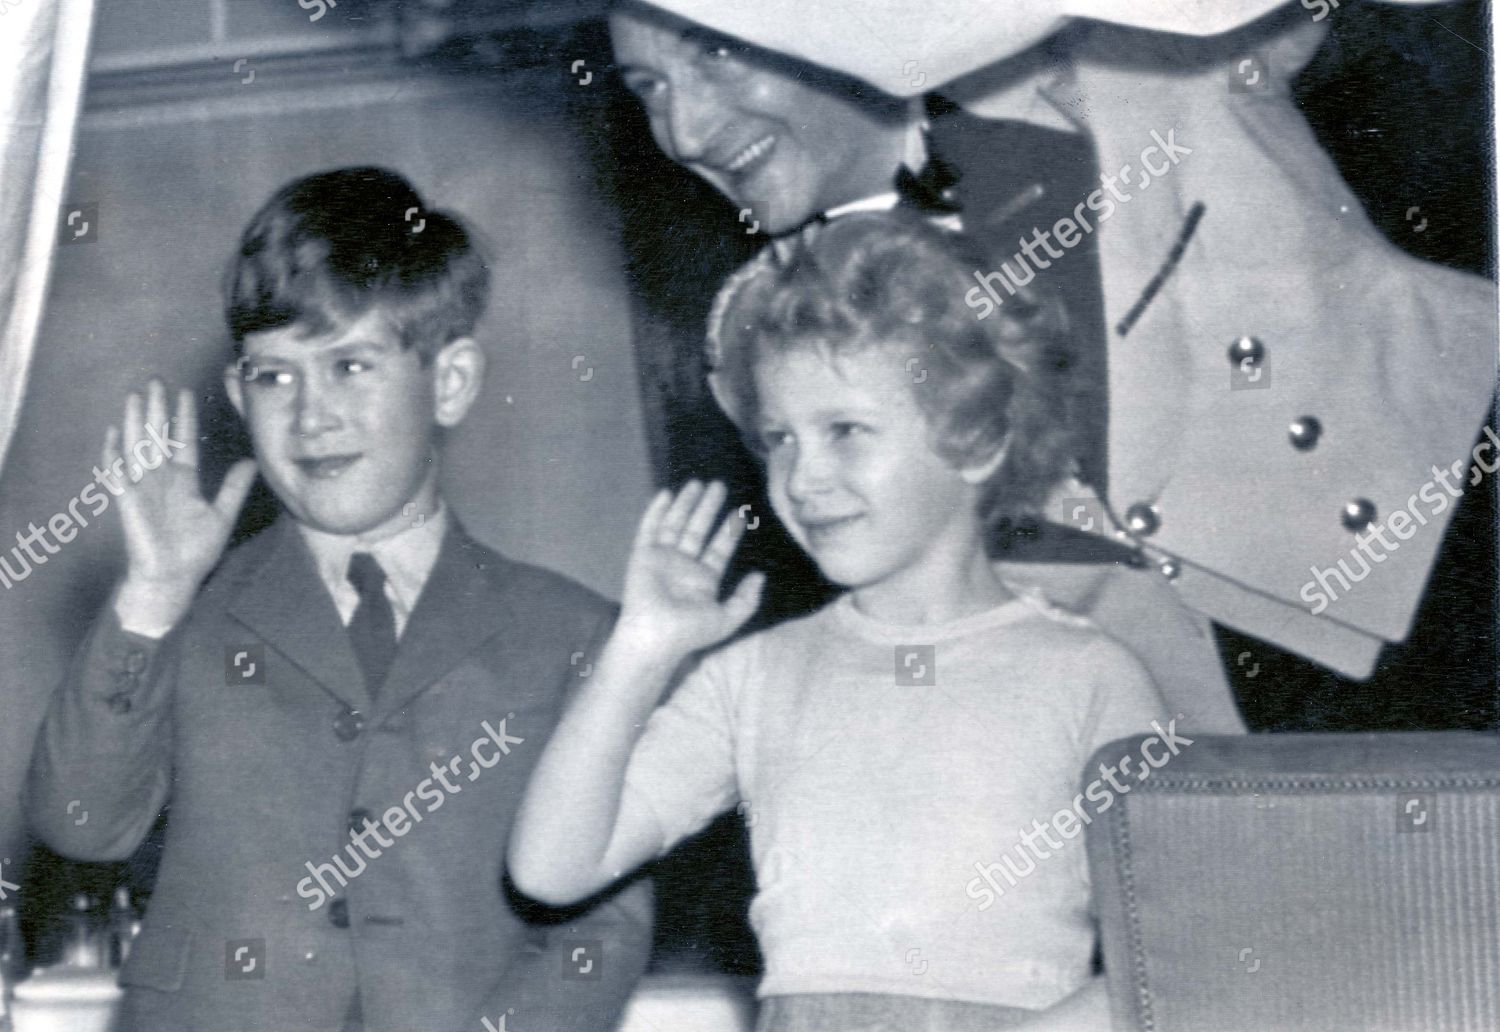 prince-charles-prince-of-wales-may-1956-the-royal-family-go-to-balmoral-for-the-whitsun-royalty-shutterstock-editorial-884400a.jpg